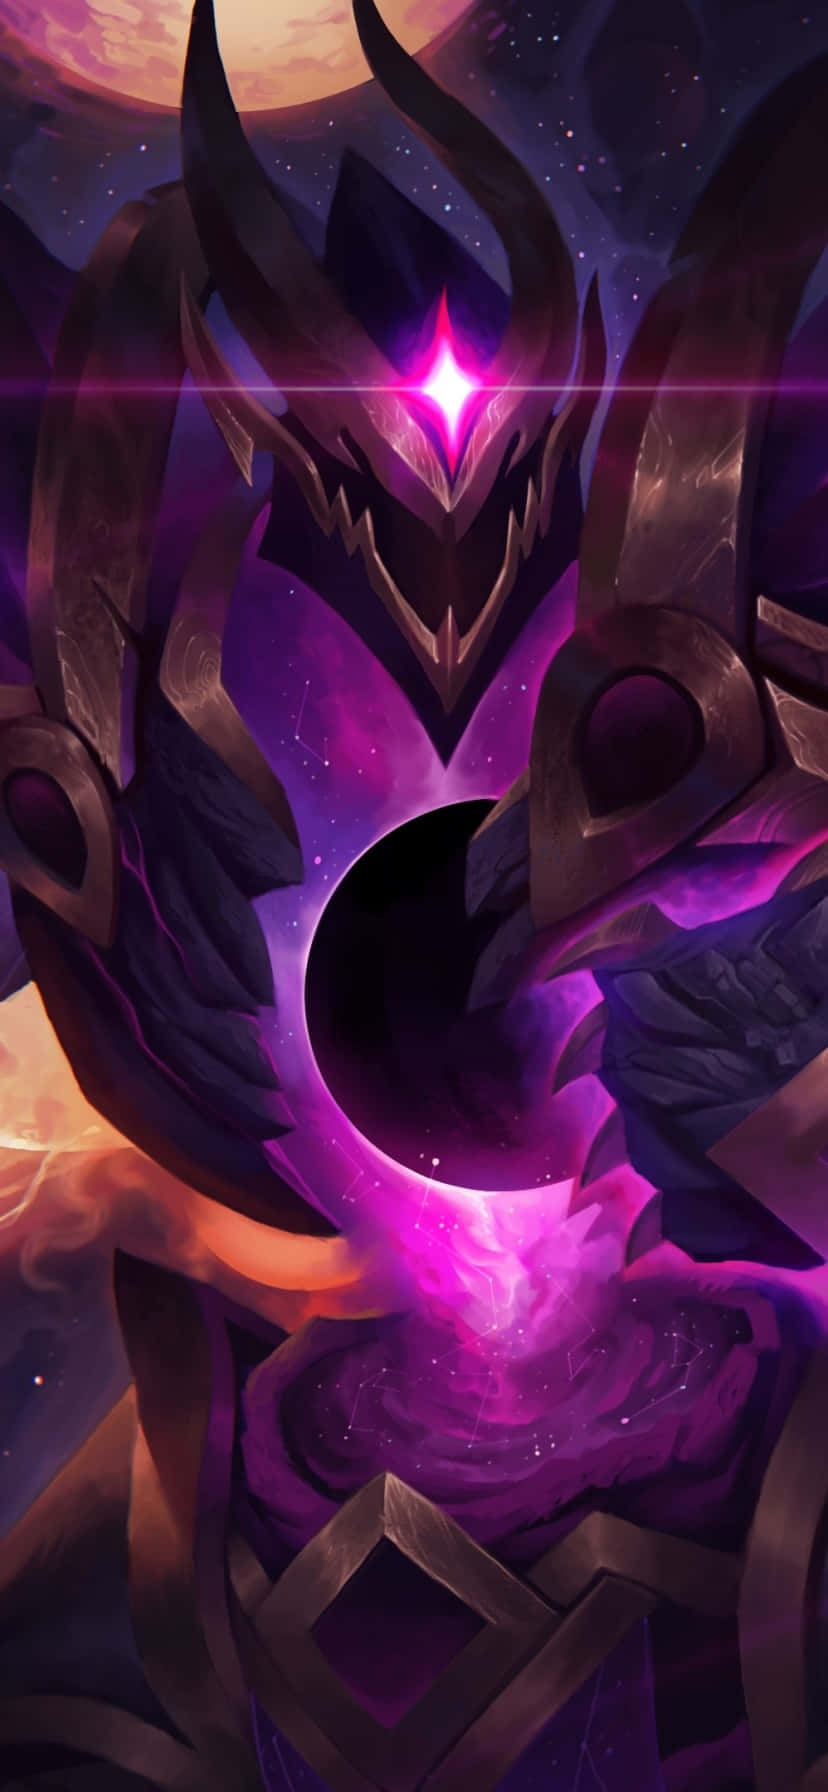 Enter a New World of Adventure and Fun with Android League of Legends